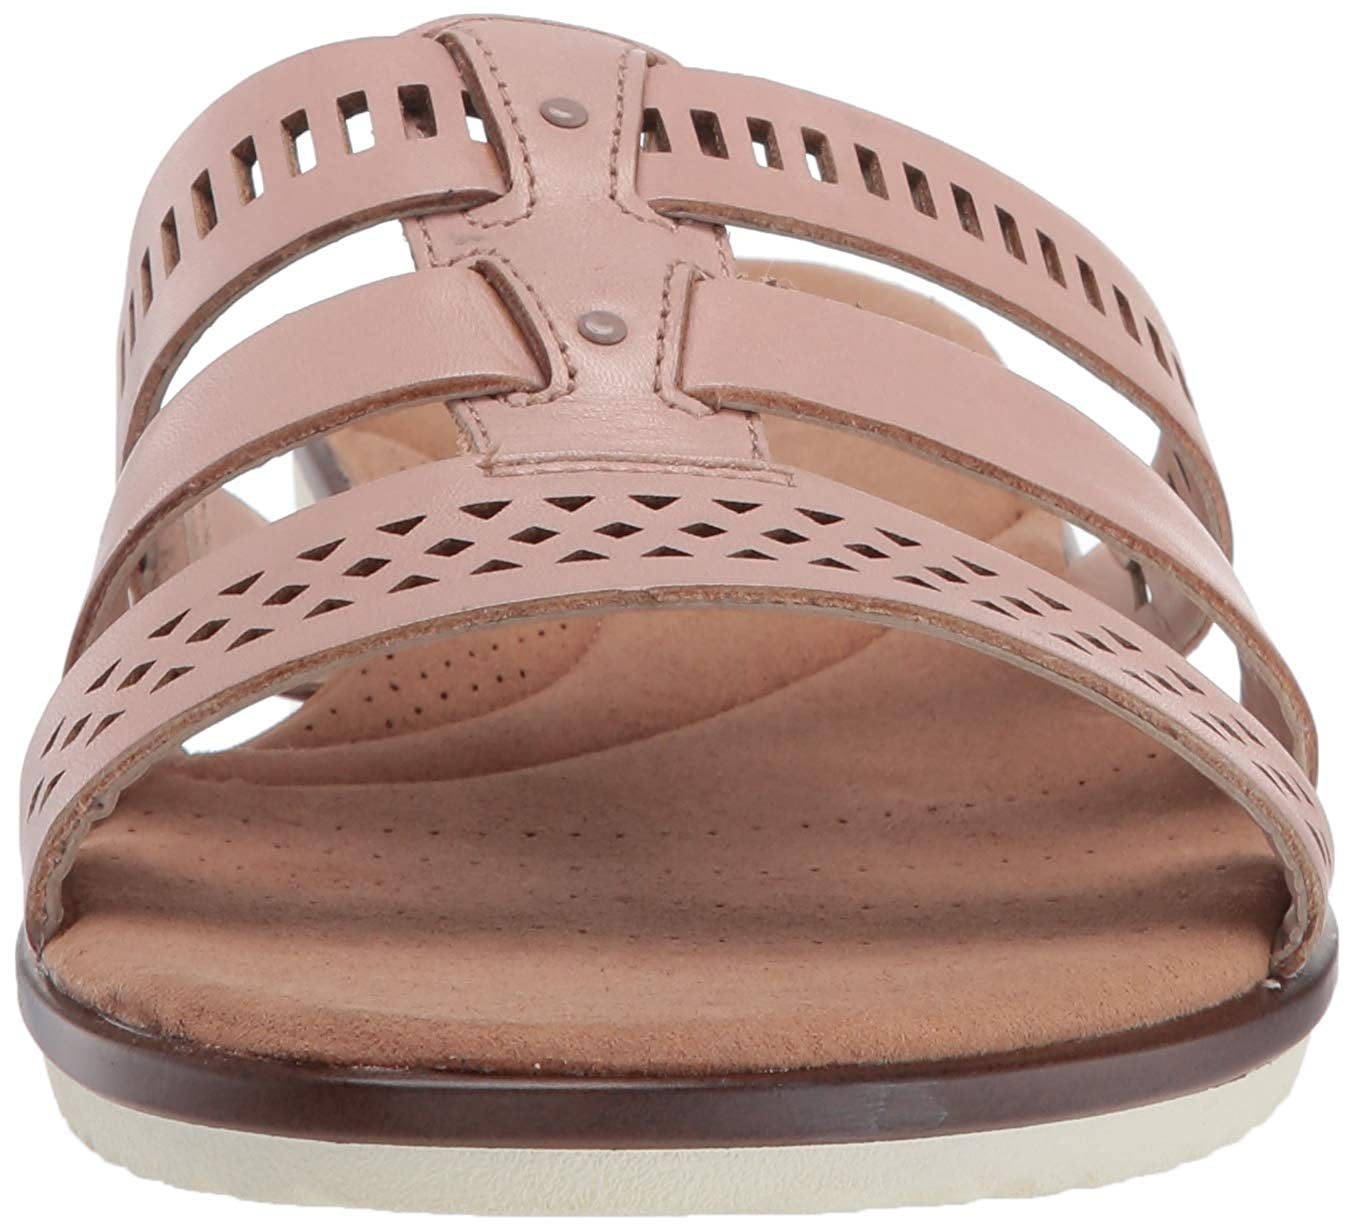 leather clarks ladies slippers